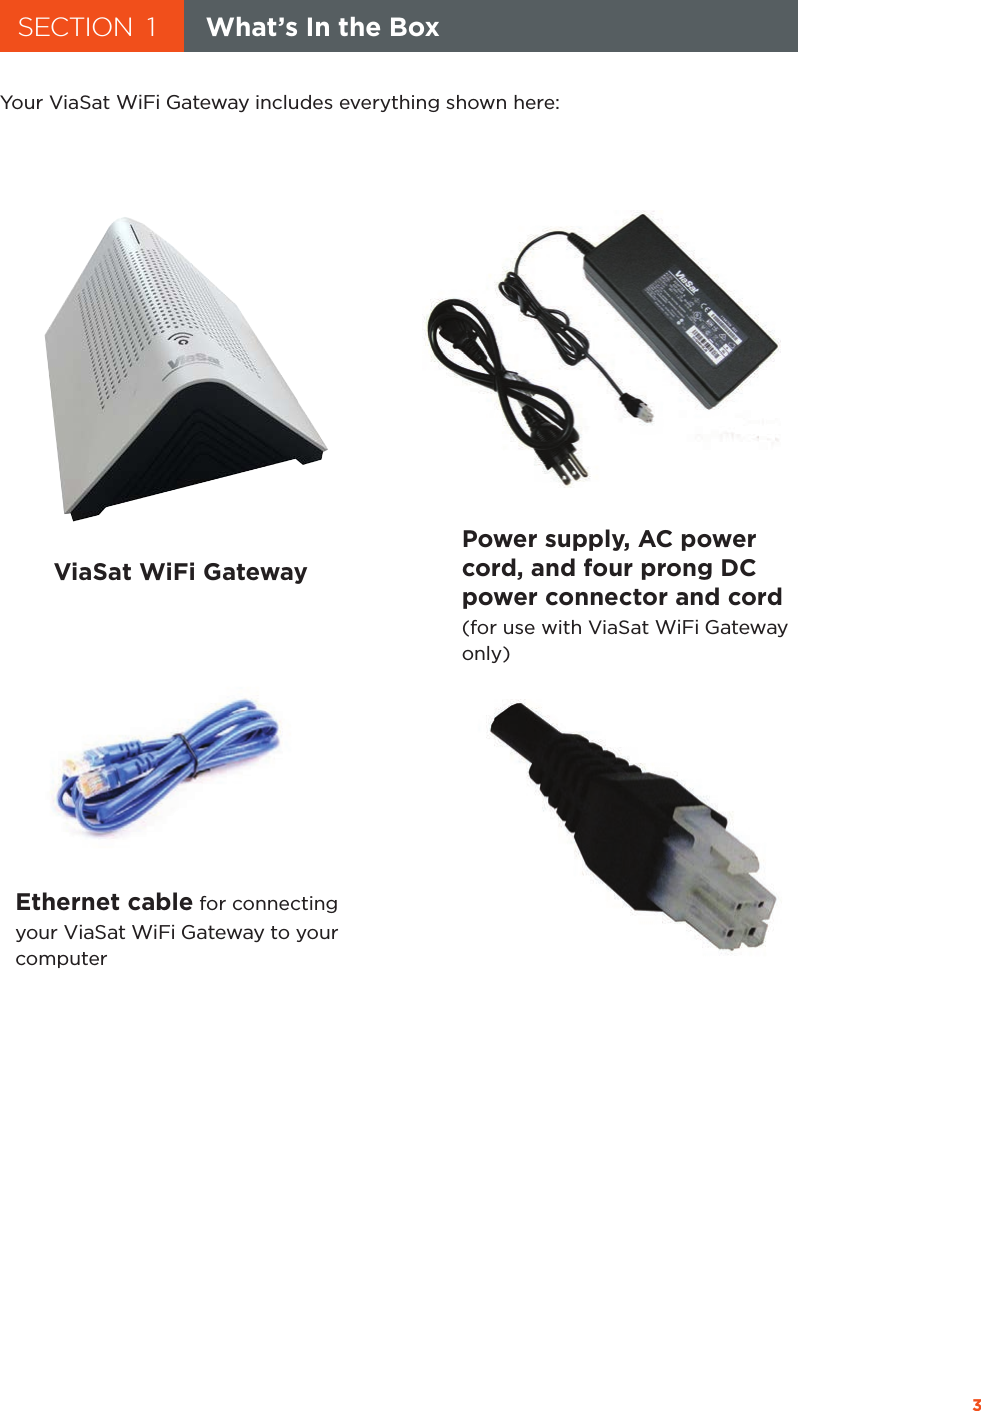  3   Your ViaSat WiFi Gateway includes everything shown here:SECTION  1 What’s In the BoxViaSat WiFi Gateway Ethernet cable for connecting your ViaSat WiFi Gateway to your computerPower supply, AC power cord, and four prong DCpower connector and cord  (for use with ViaSat WiFi Gateway only)